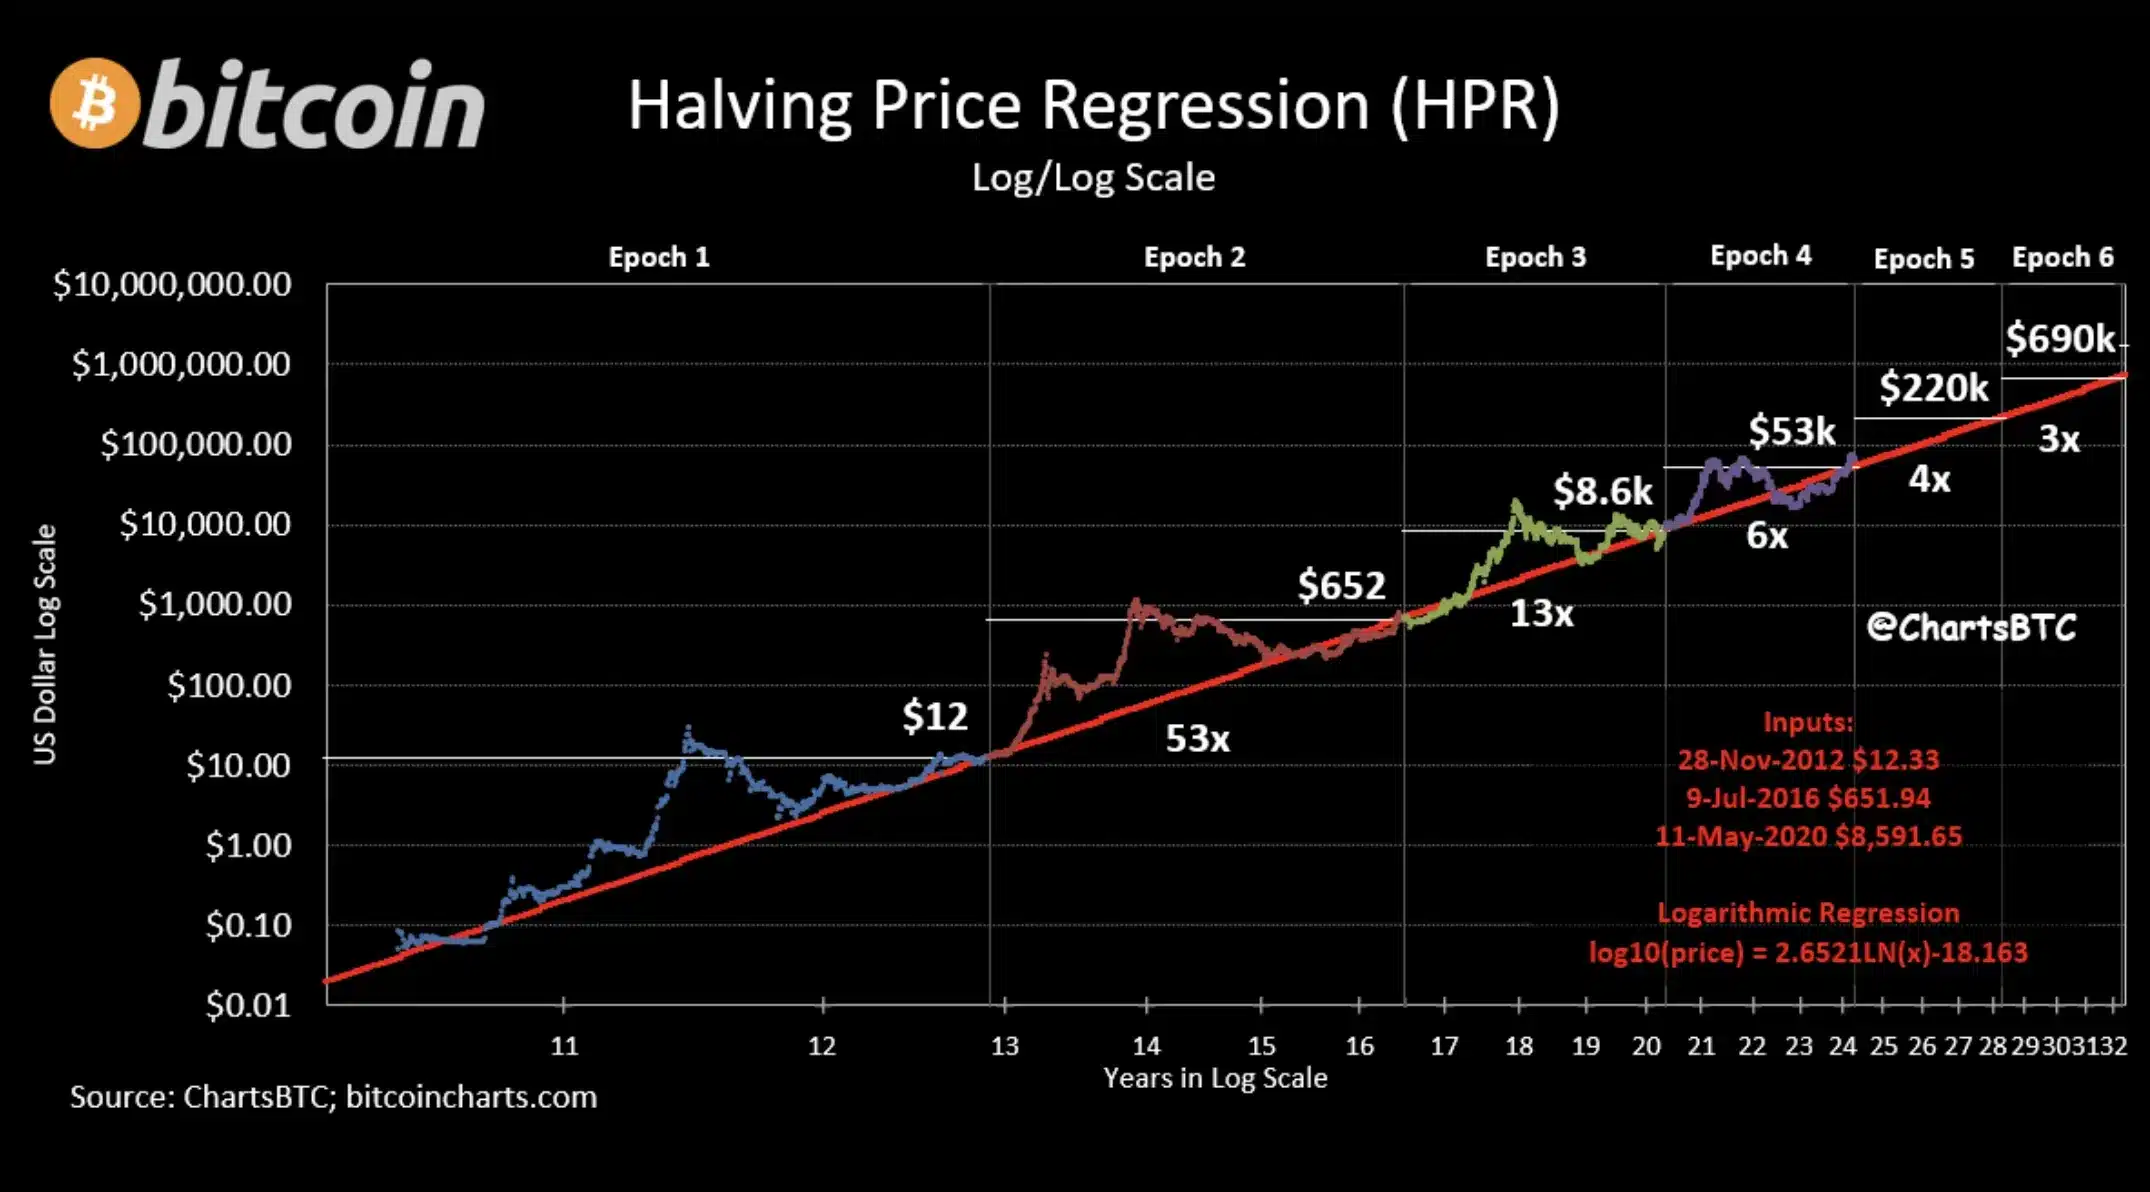 Bitcoin's post-halving surge to follow historical patterns.